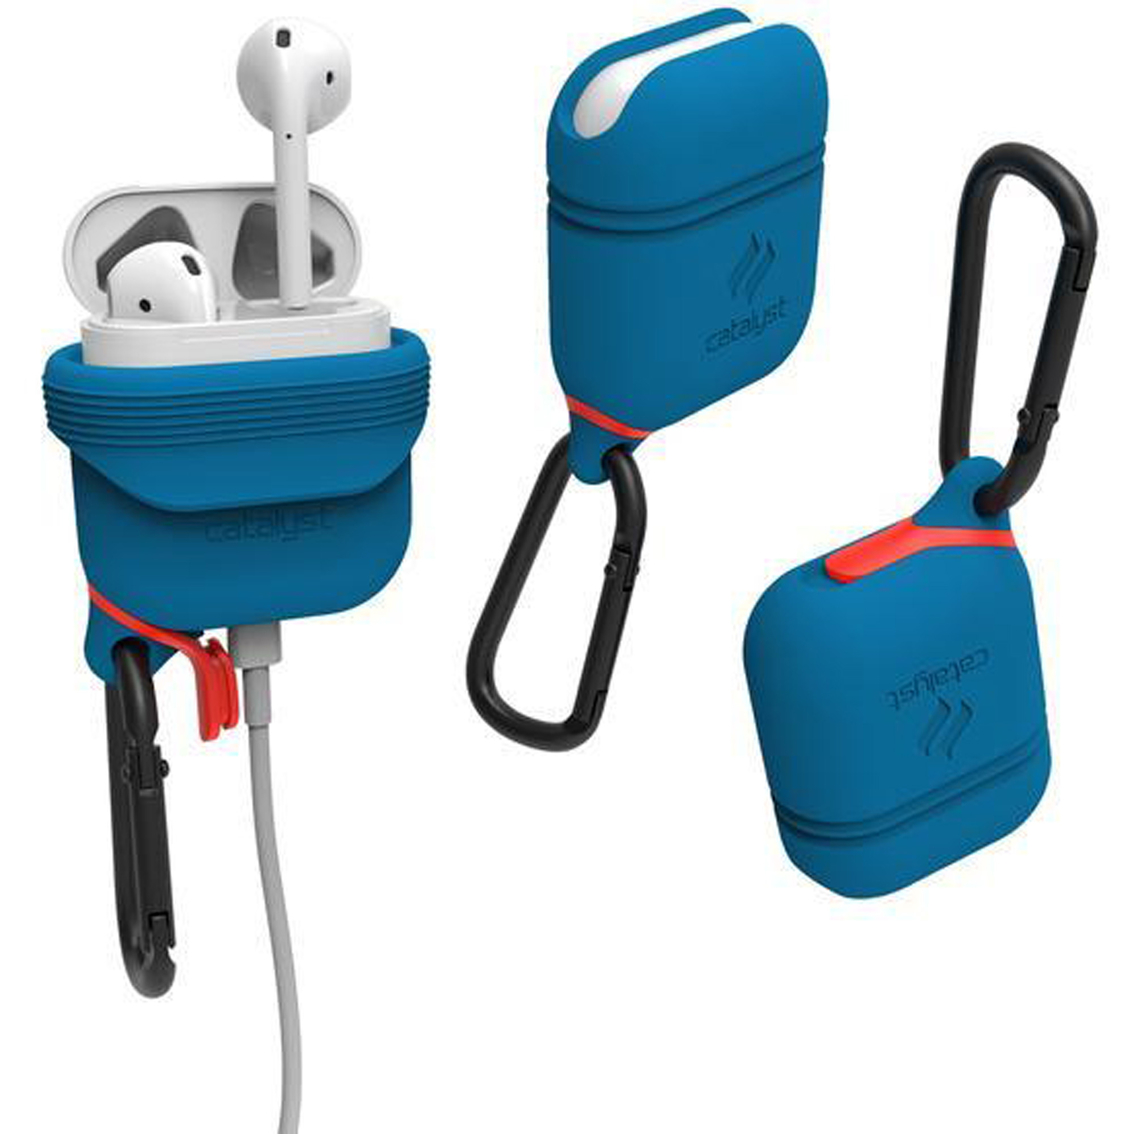 Catalyst Waterproof Case for Airpods - Image 2 of 3